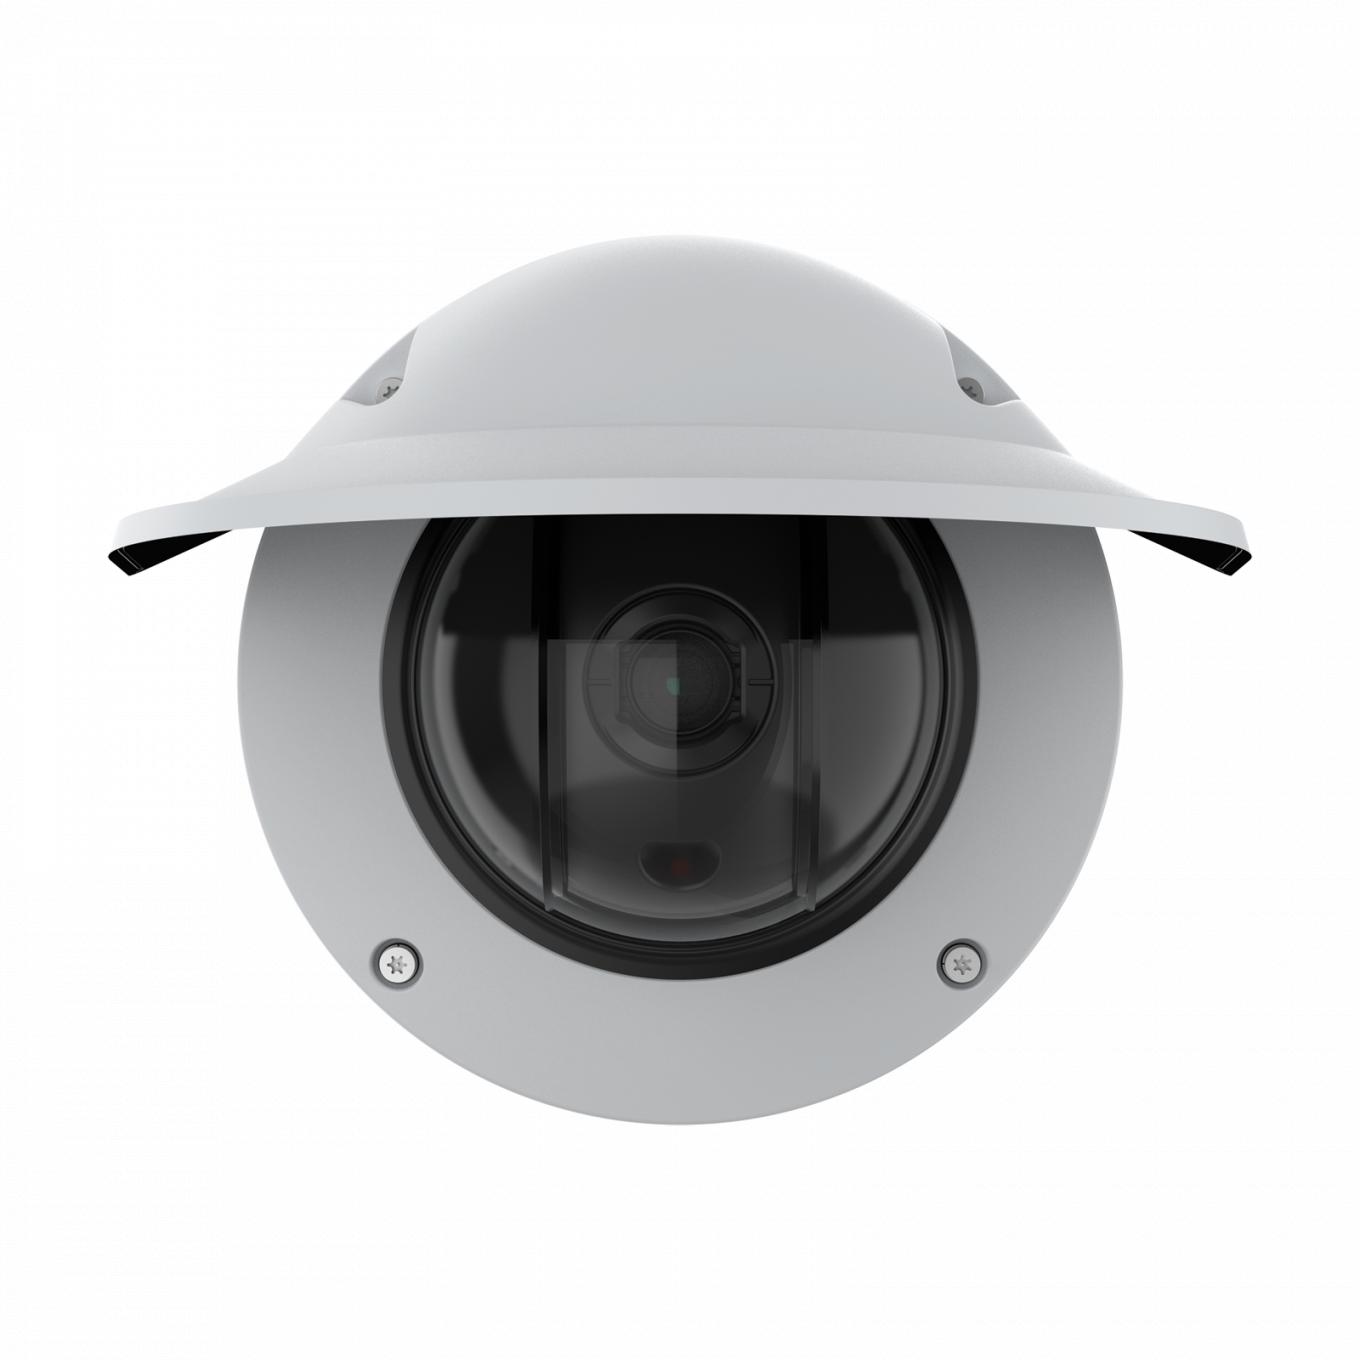 AXIS Q3536-LVE Dome Camera with weathershield, viewed from its front